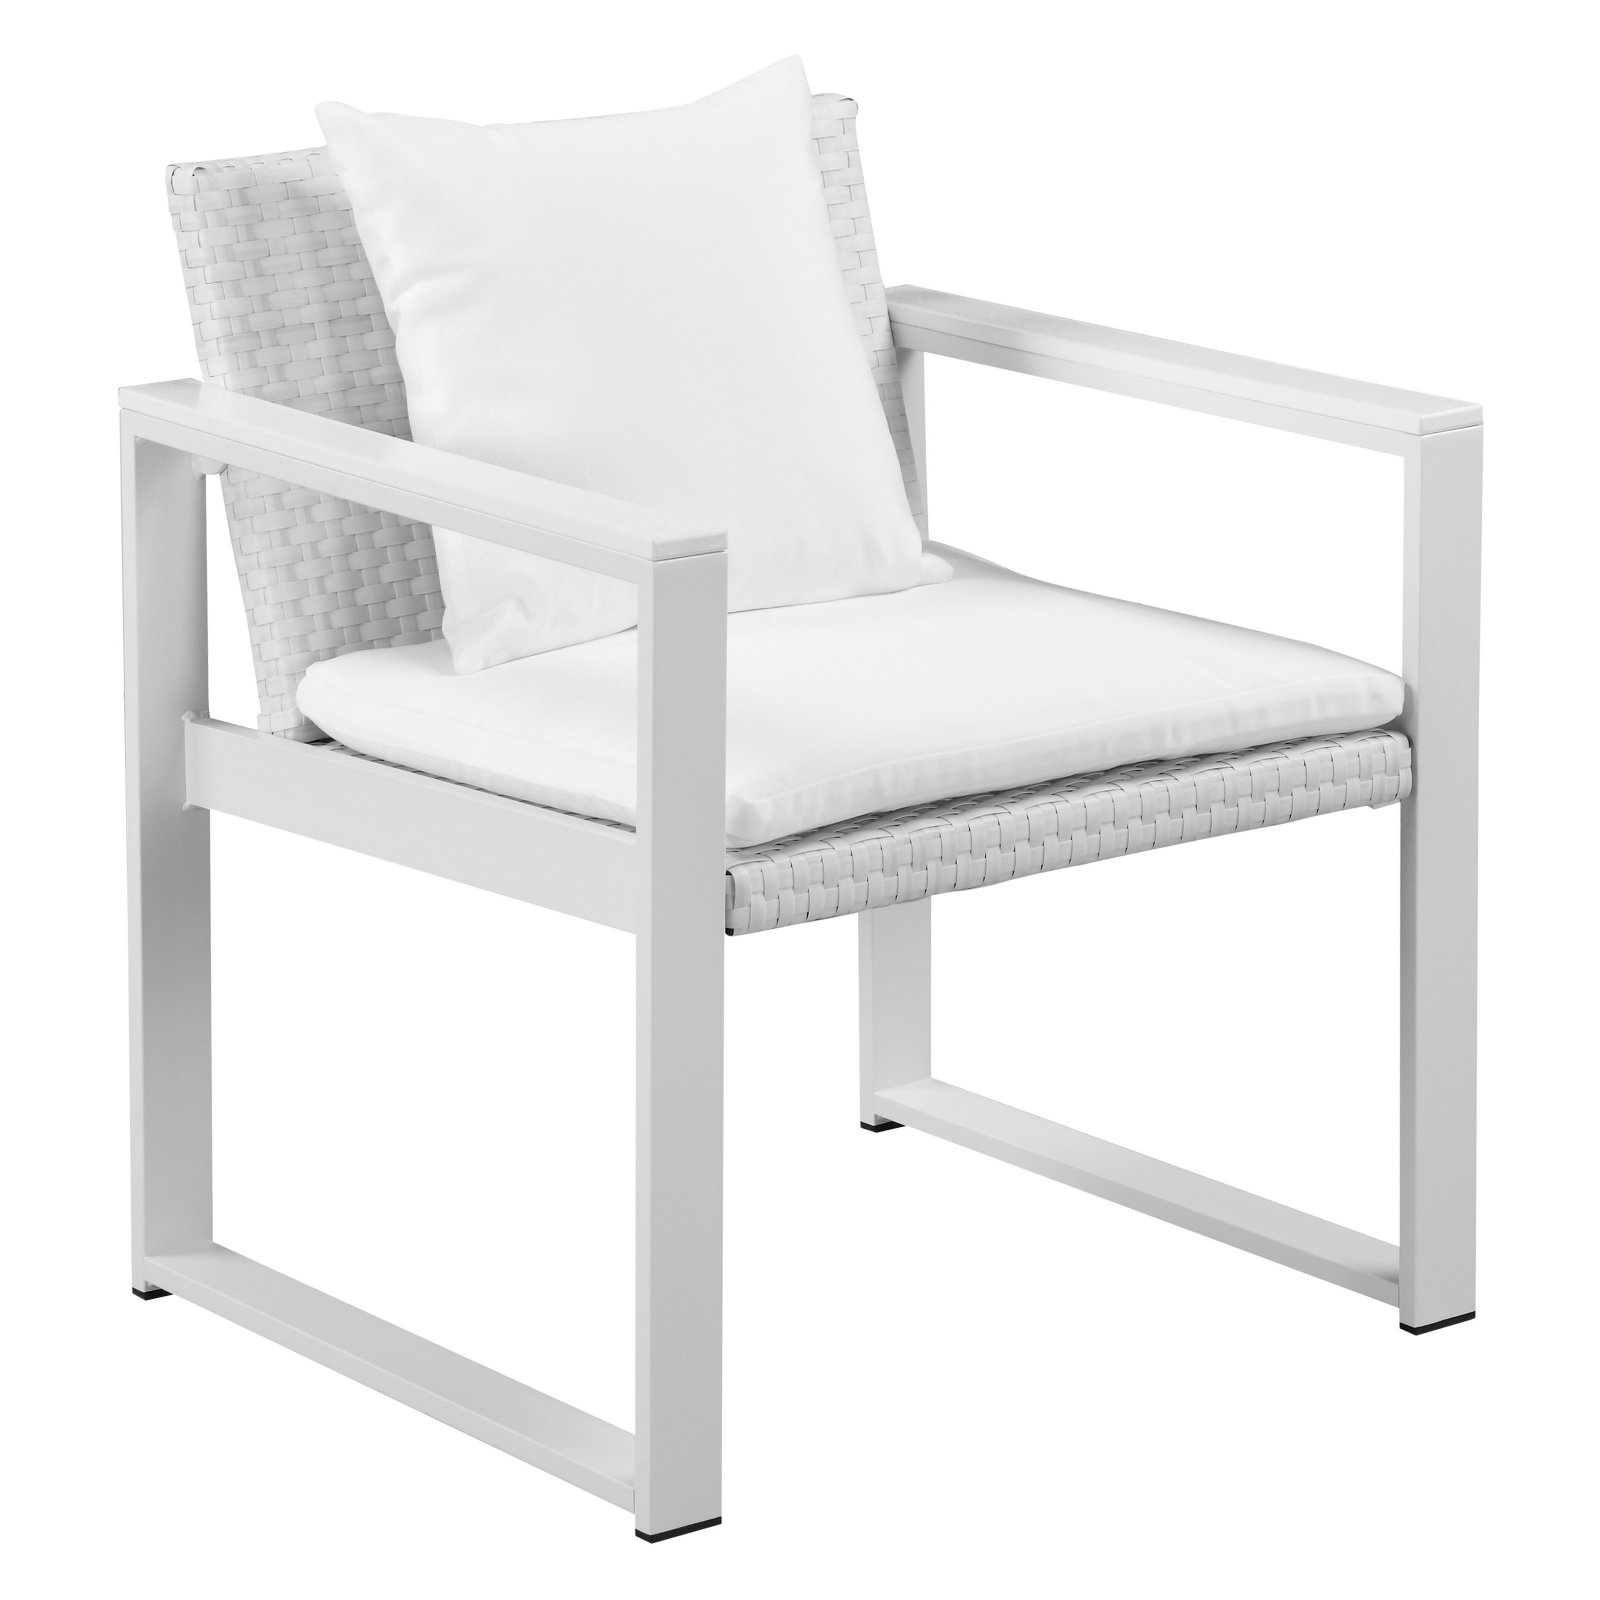 Pangea Home Chester Patio Lounge Chair - image 2 of 11